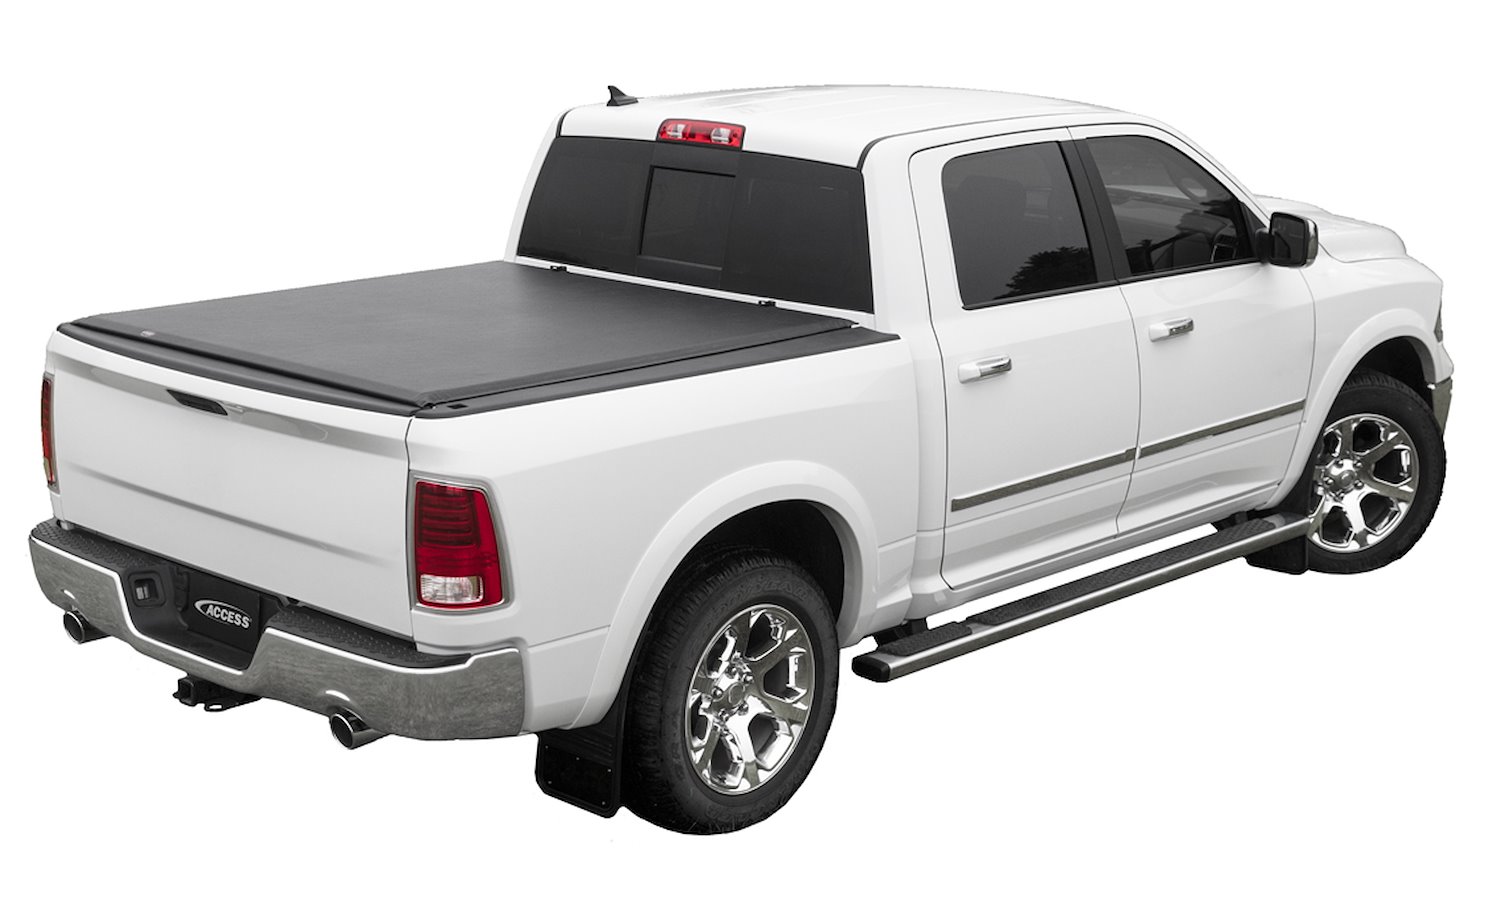 LORADO Roll-Up Tonneau Cover, 2009-2018 Ram 1500, Fits Select Ram Classic, with 5 ft. 7 in. Bed